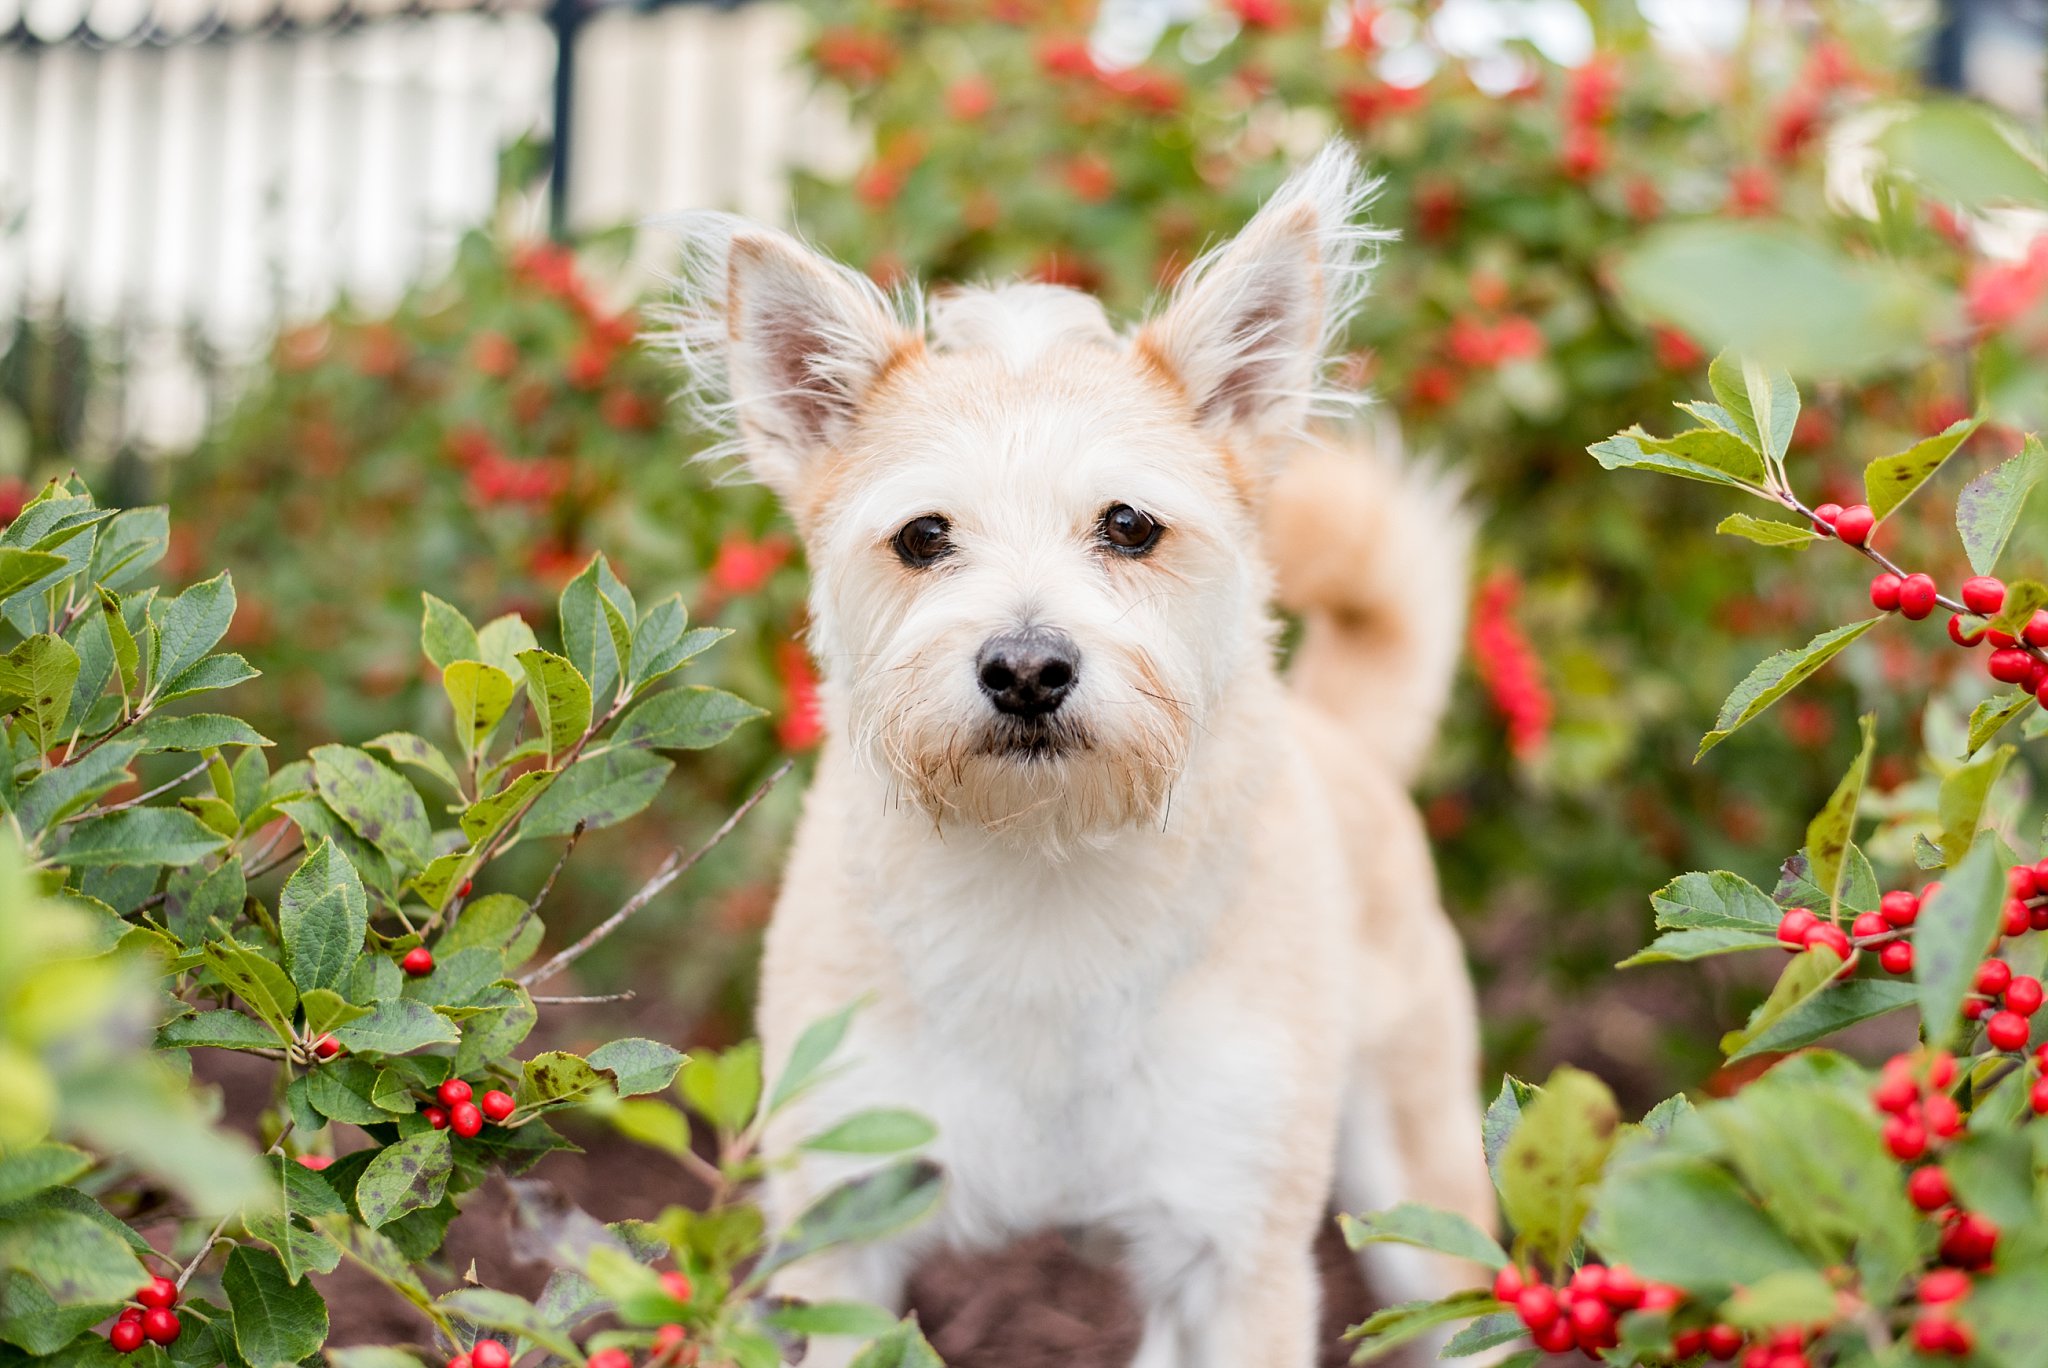 terrier mix in red berry bushes at Pittsburgh's Point State Park